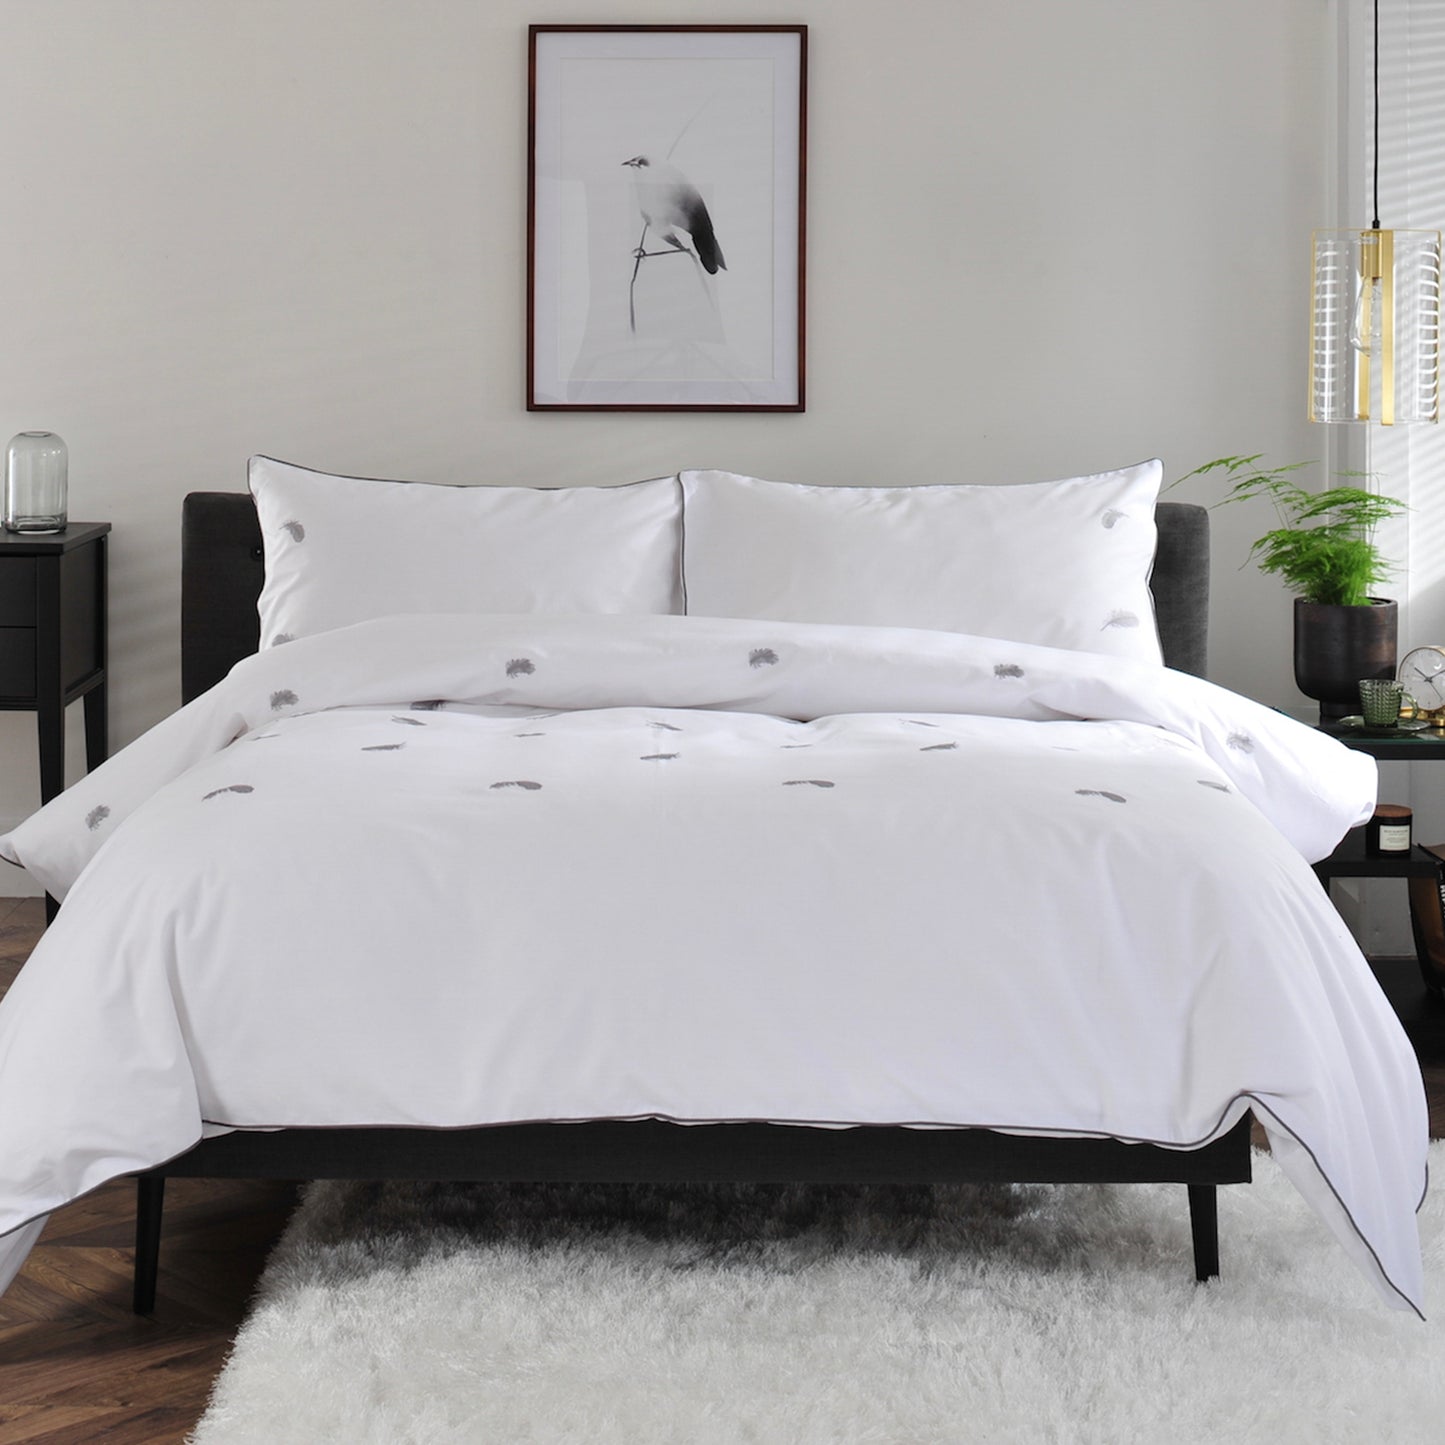 The Lyndon Company White Embroidered Grey Feathers Cotton Duvet Set